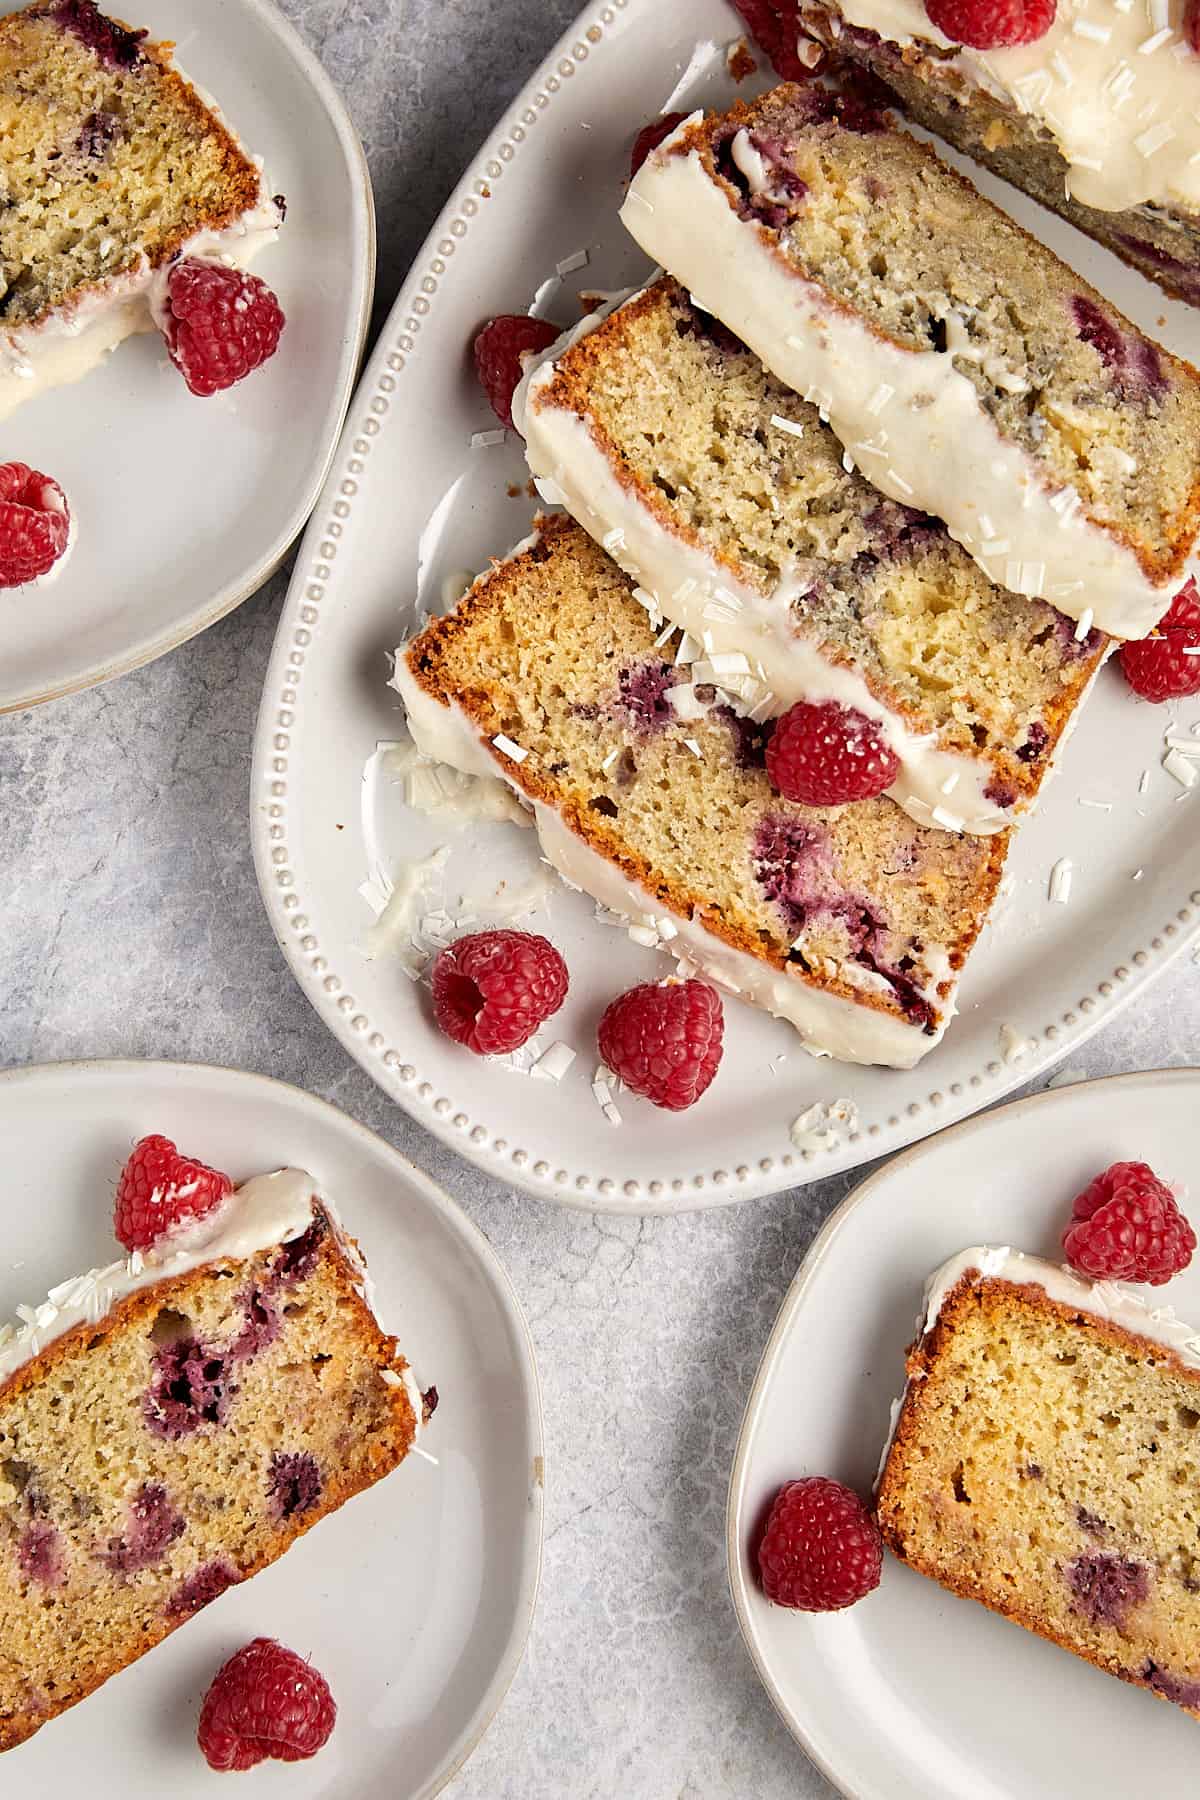 Overhead view of sliced raspberry and white chocolate loaf cake arranged on white plates, garnished with fresh raspberries and flakes of white chocolate. The plates are set on a grey marble countertop.